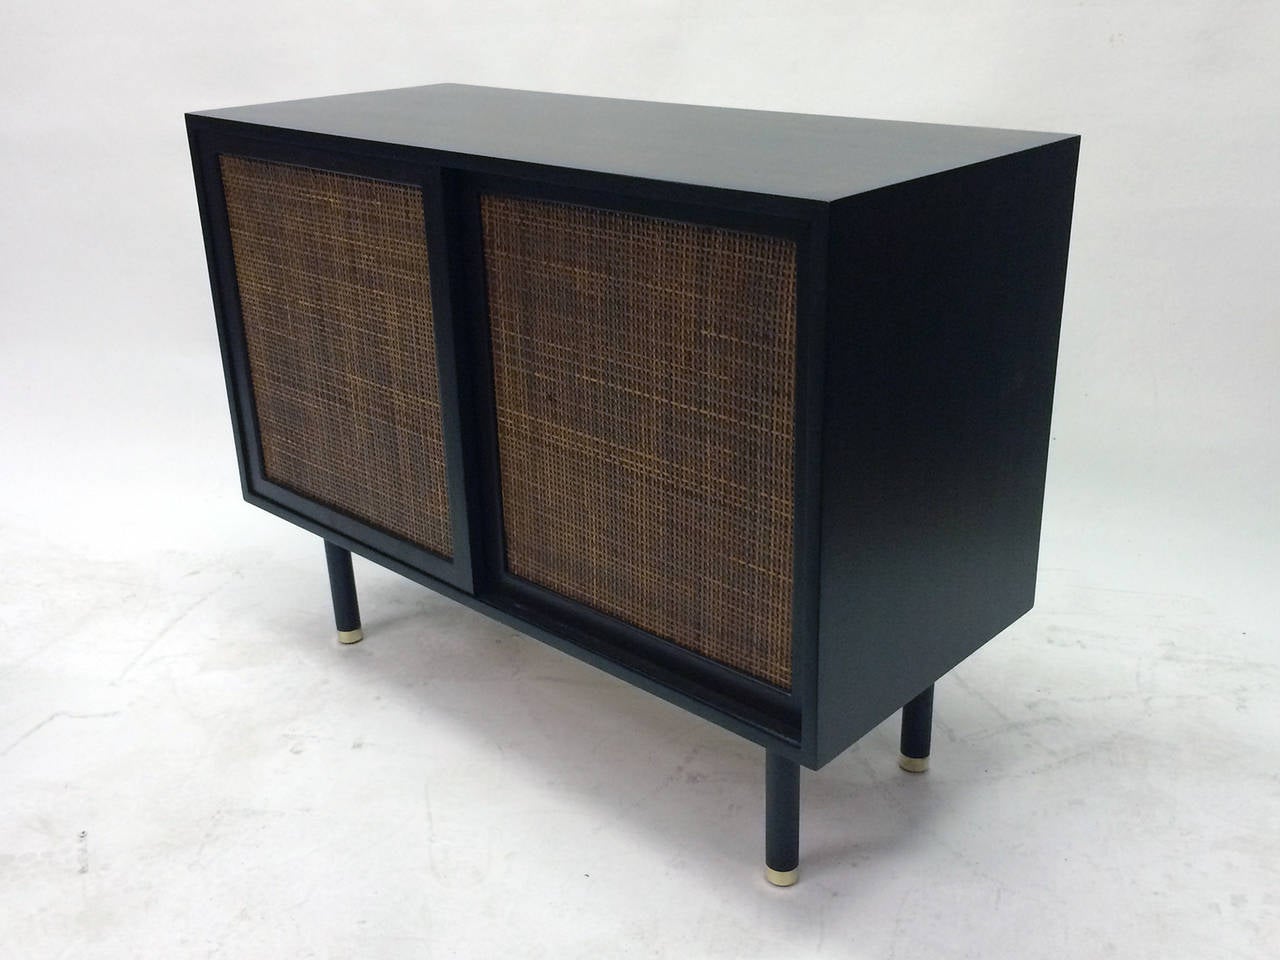 This buffet features two sliding doors opening on one  shelf on one side and 3 drawers on the left.  Doors are fronted with rattan. Beautiful dark grain pattern in the wood.  Brass caps on round legs.
The piece retains the labe 